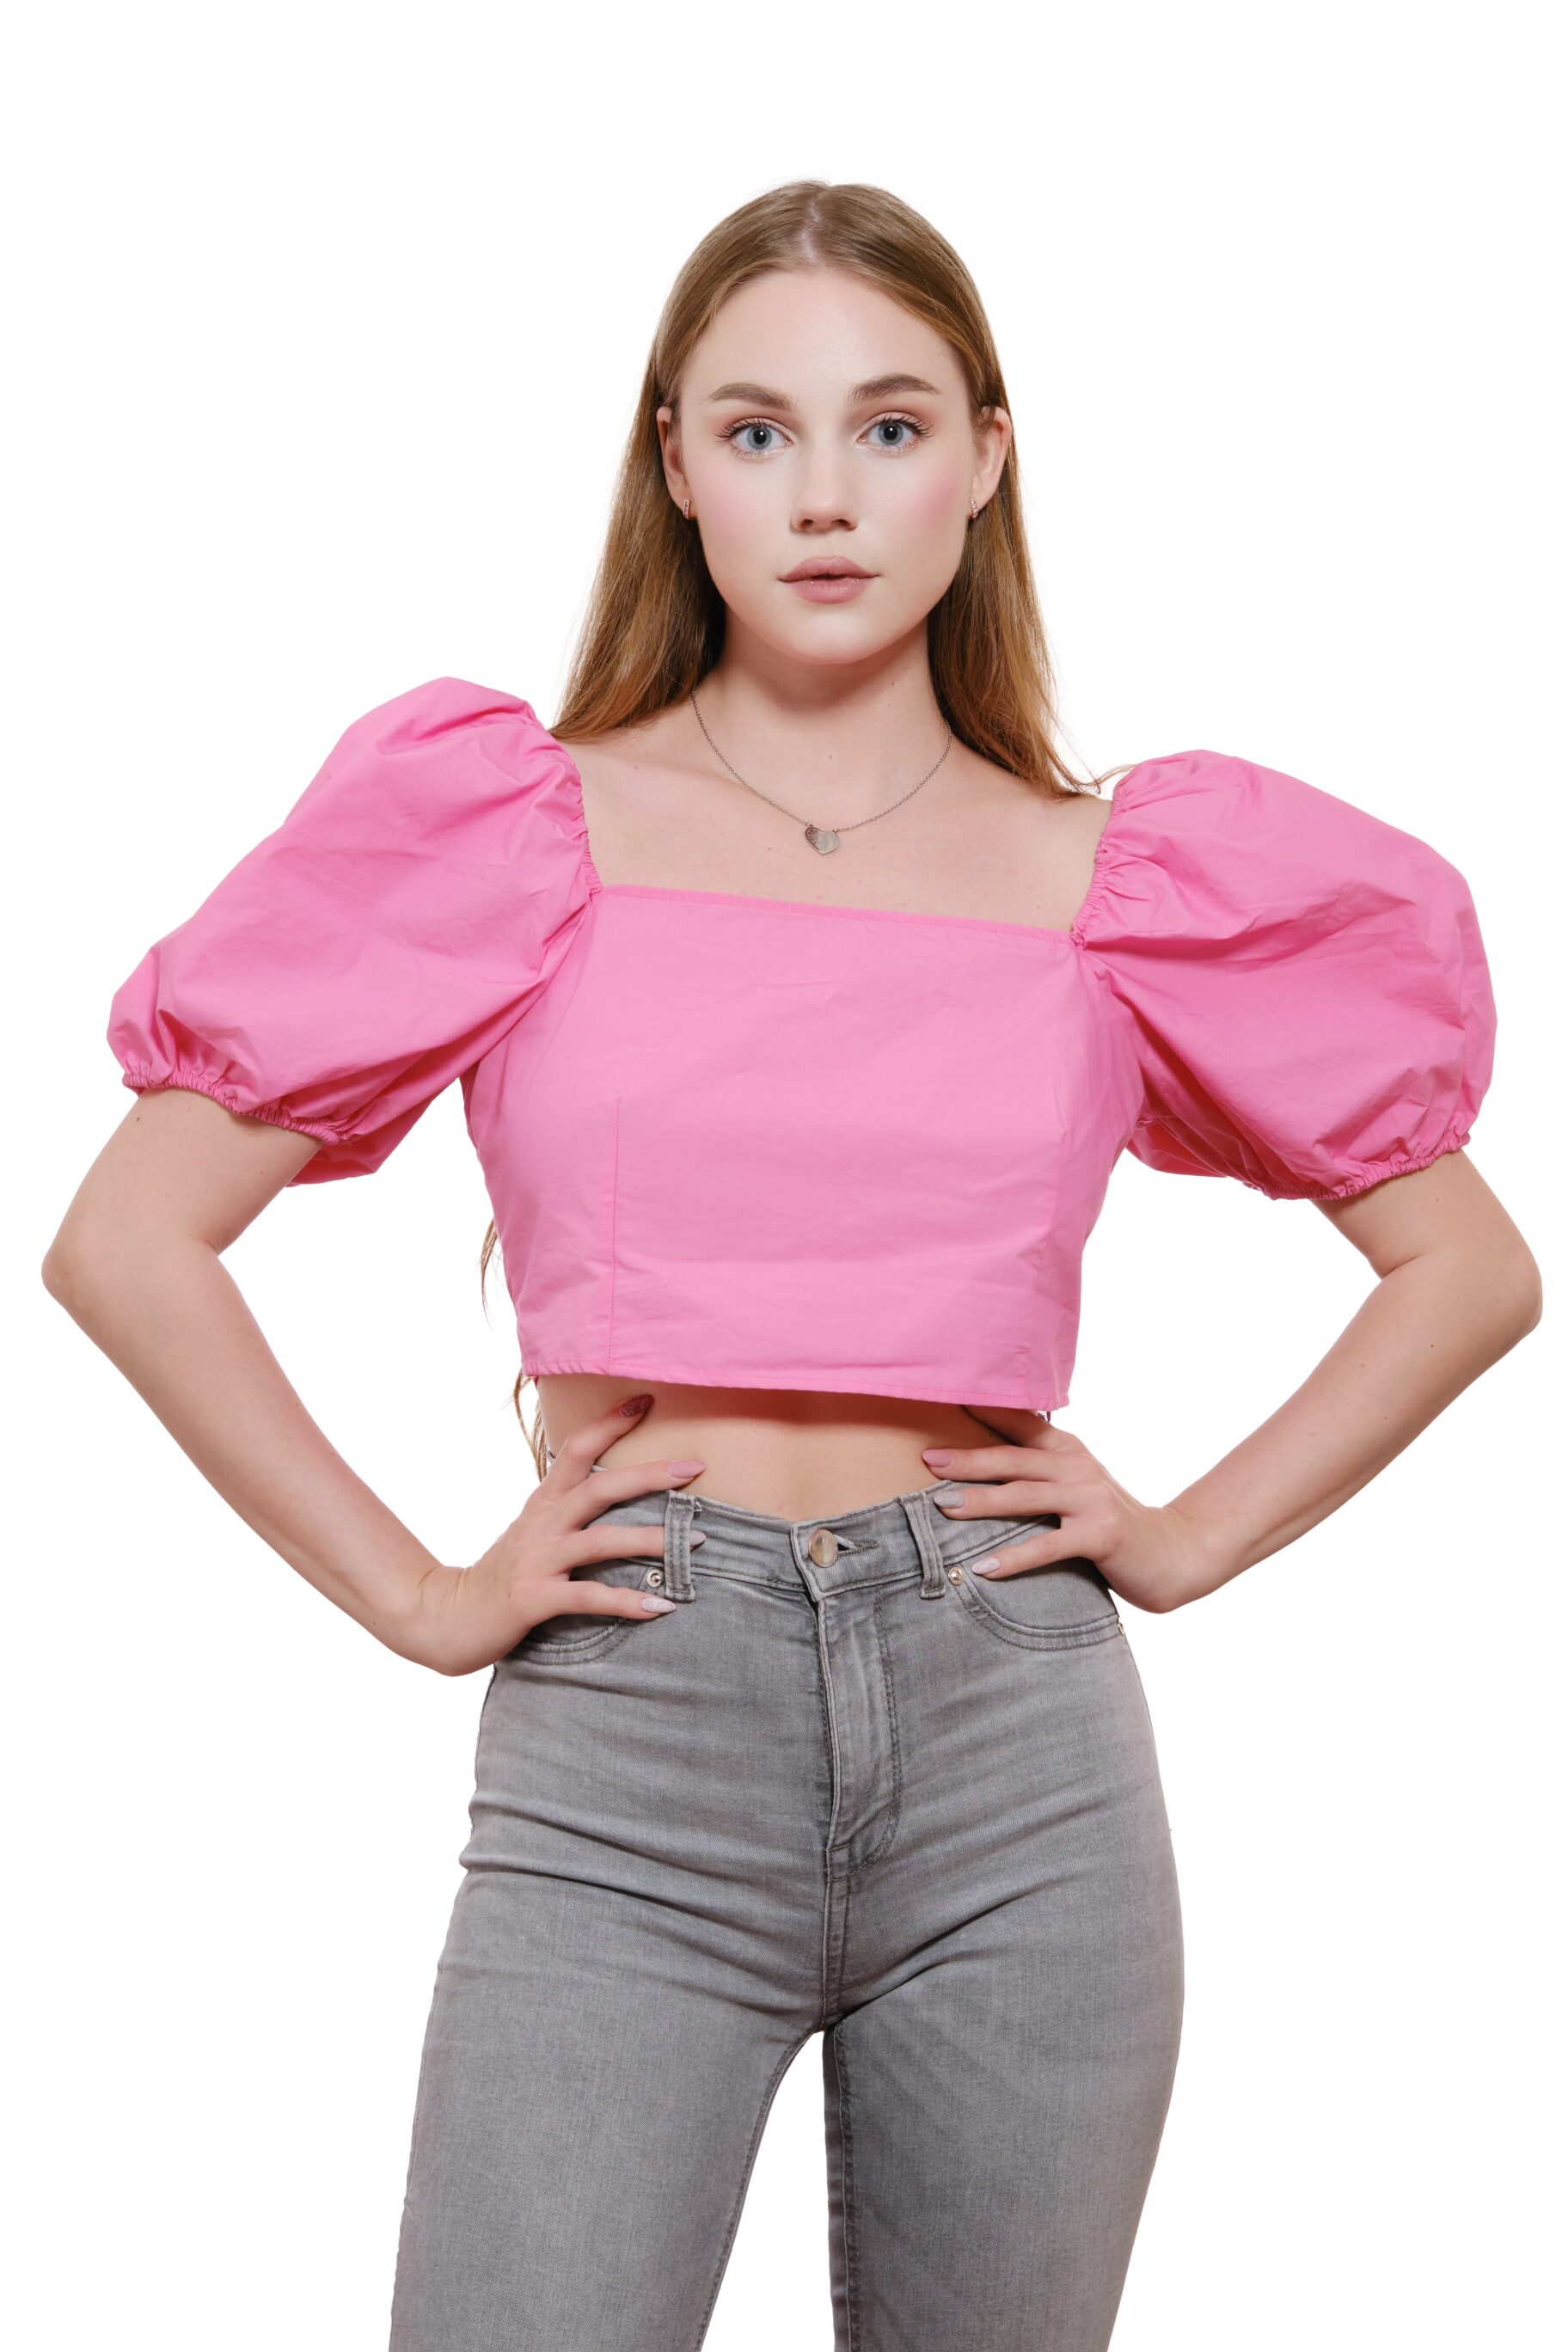 Pink Blouses With Gray Pants For Women